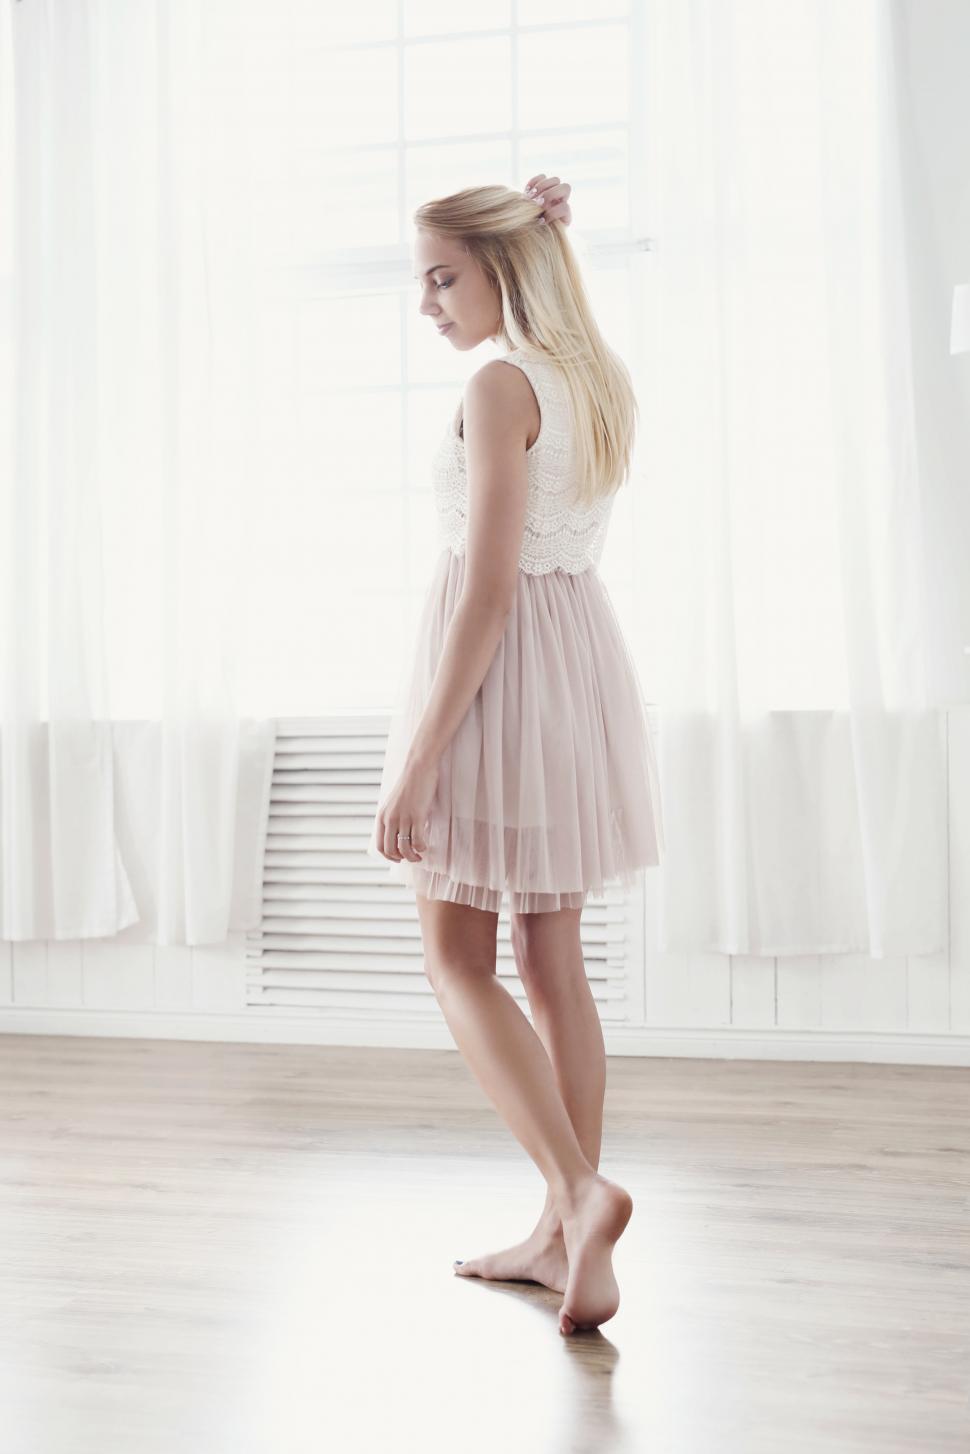 Free Image of Young woman standing in a room 